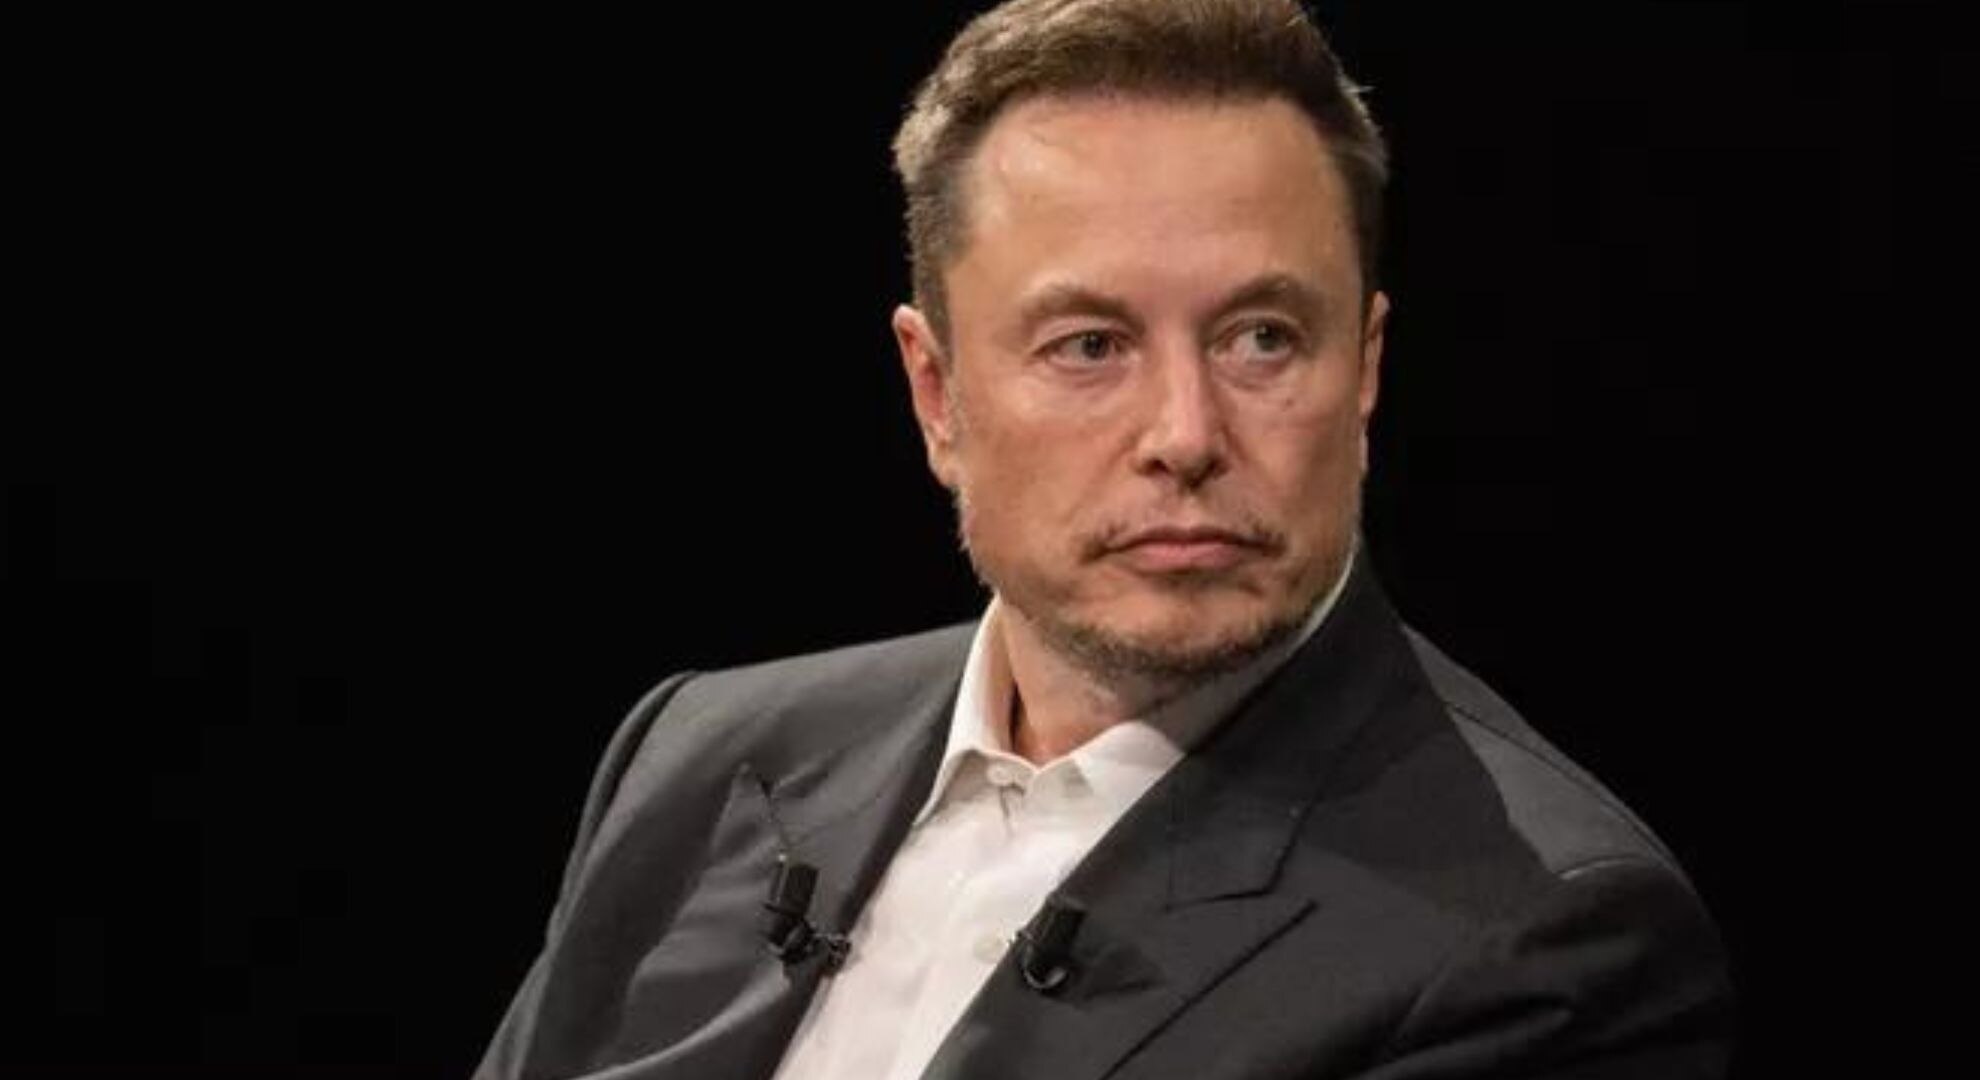 Elon Musk’s Comments on ‘Woke Mind Virus’ and Child’s Transition Spark Viral Outcry